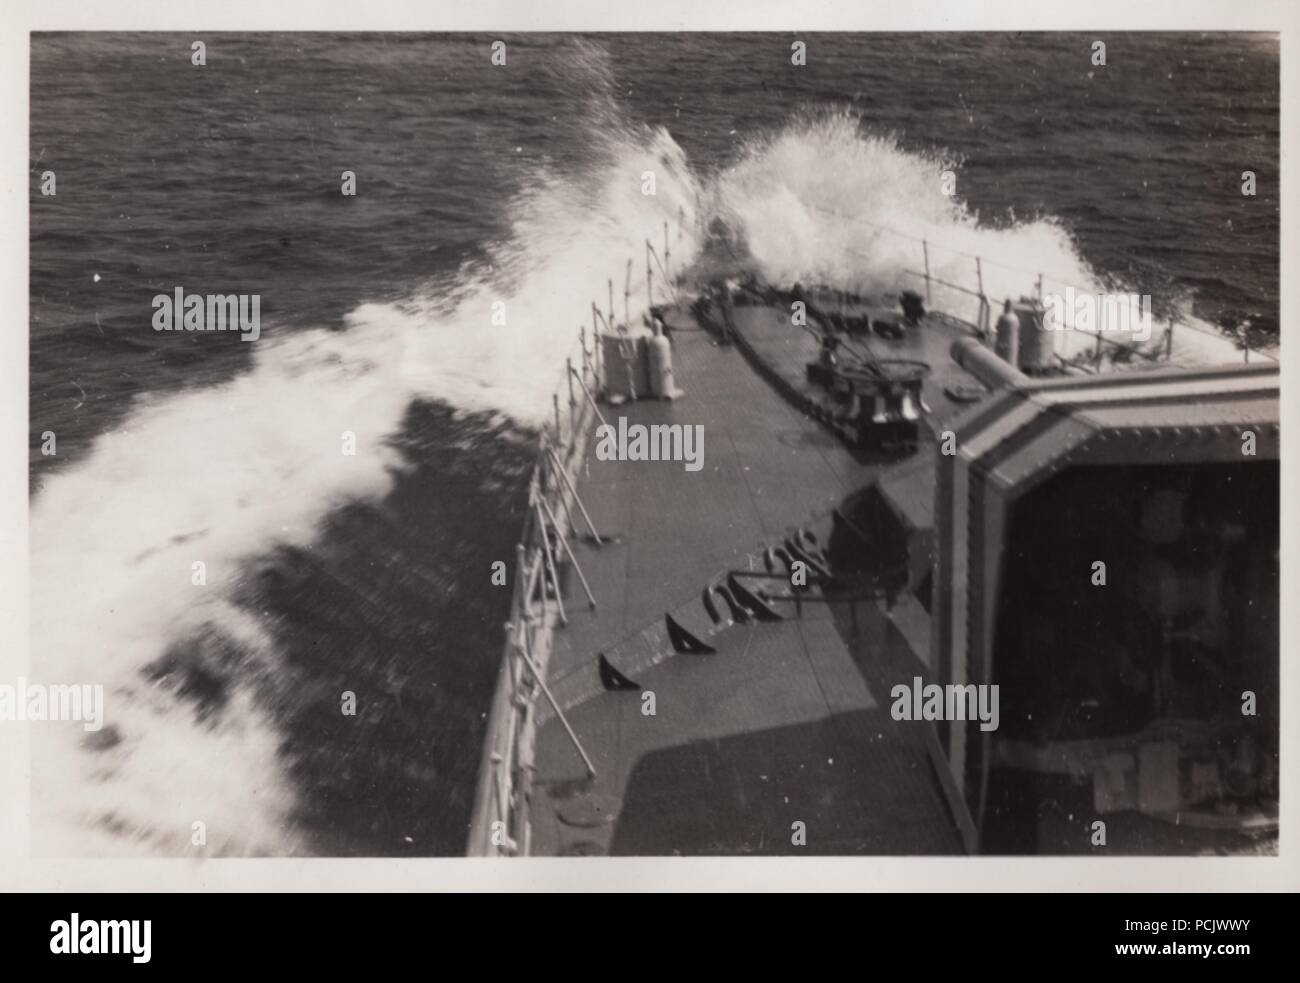 Image from the photo album of Oberfänrich Wilhelm Gaul - The bow of German Torpedoboot Leopard (Torpedo Boat Leopard) in heavy seas during the Spanish Civil War. Stock Photo